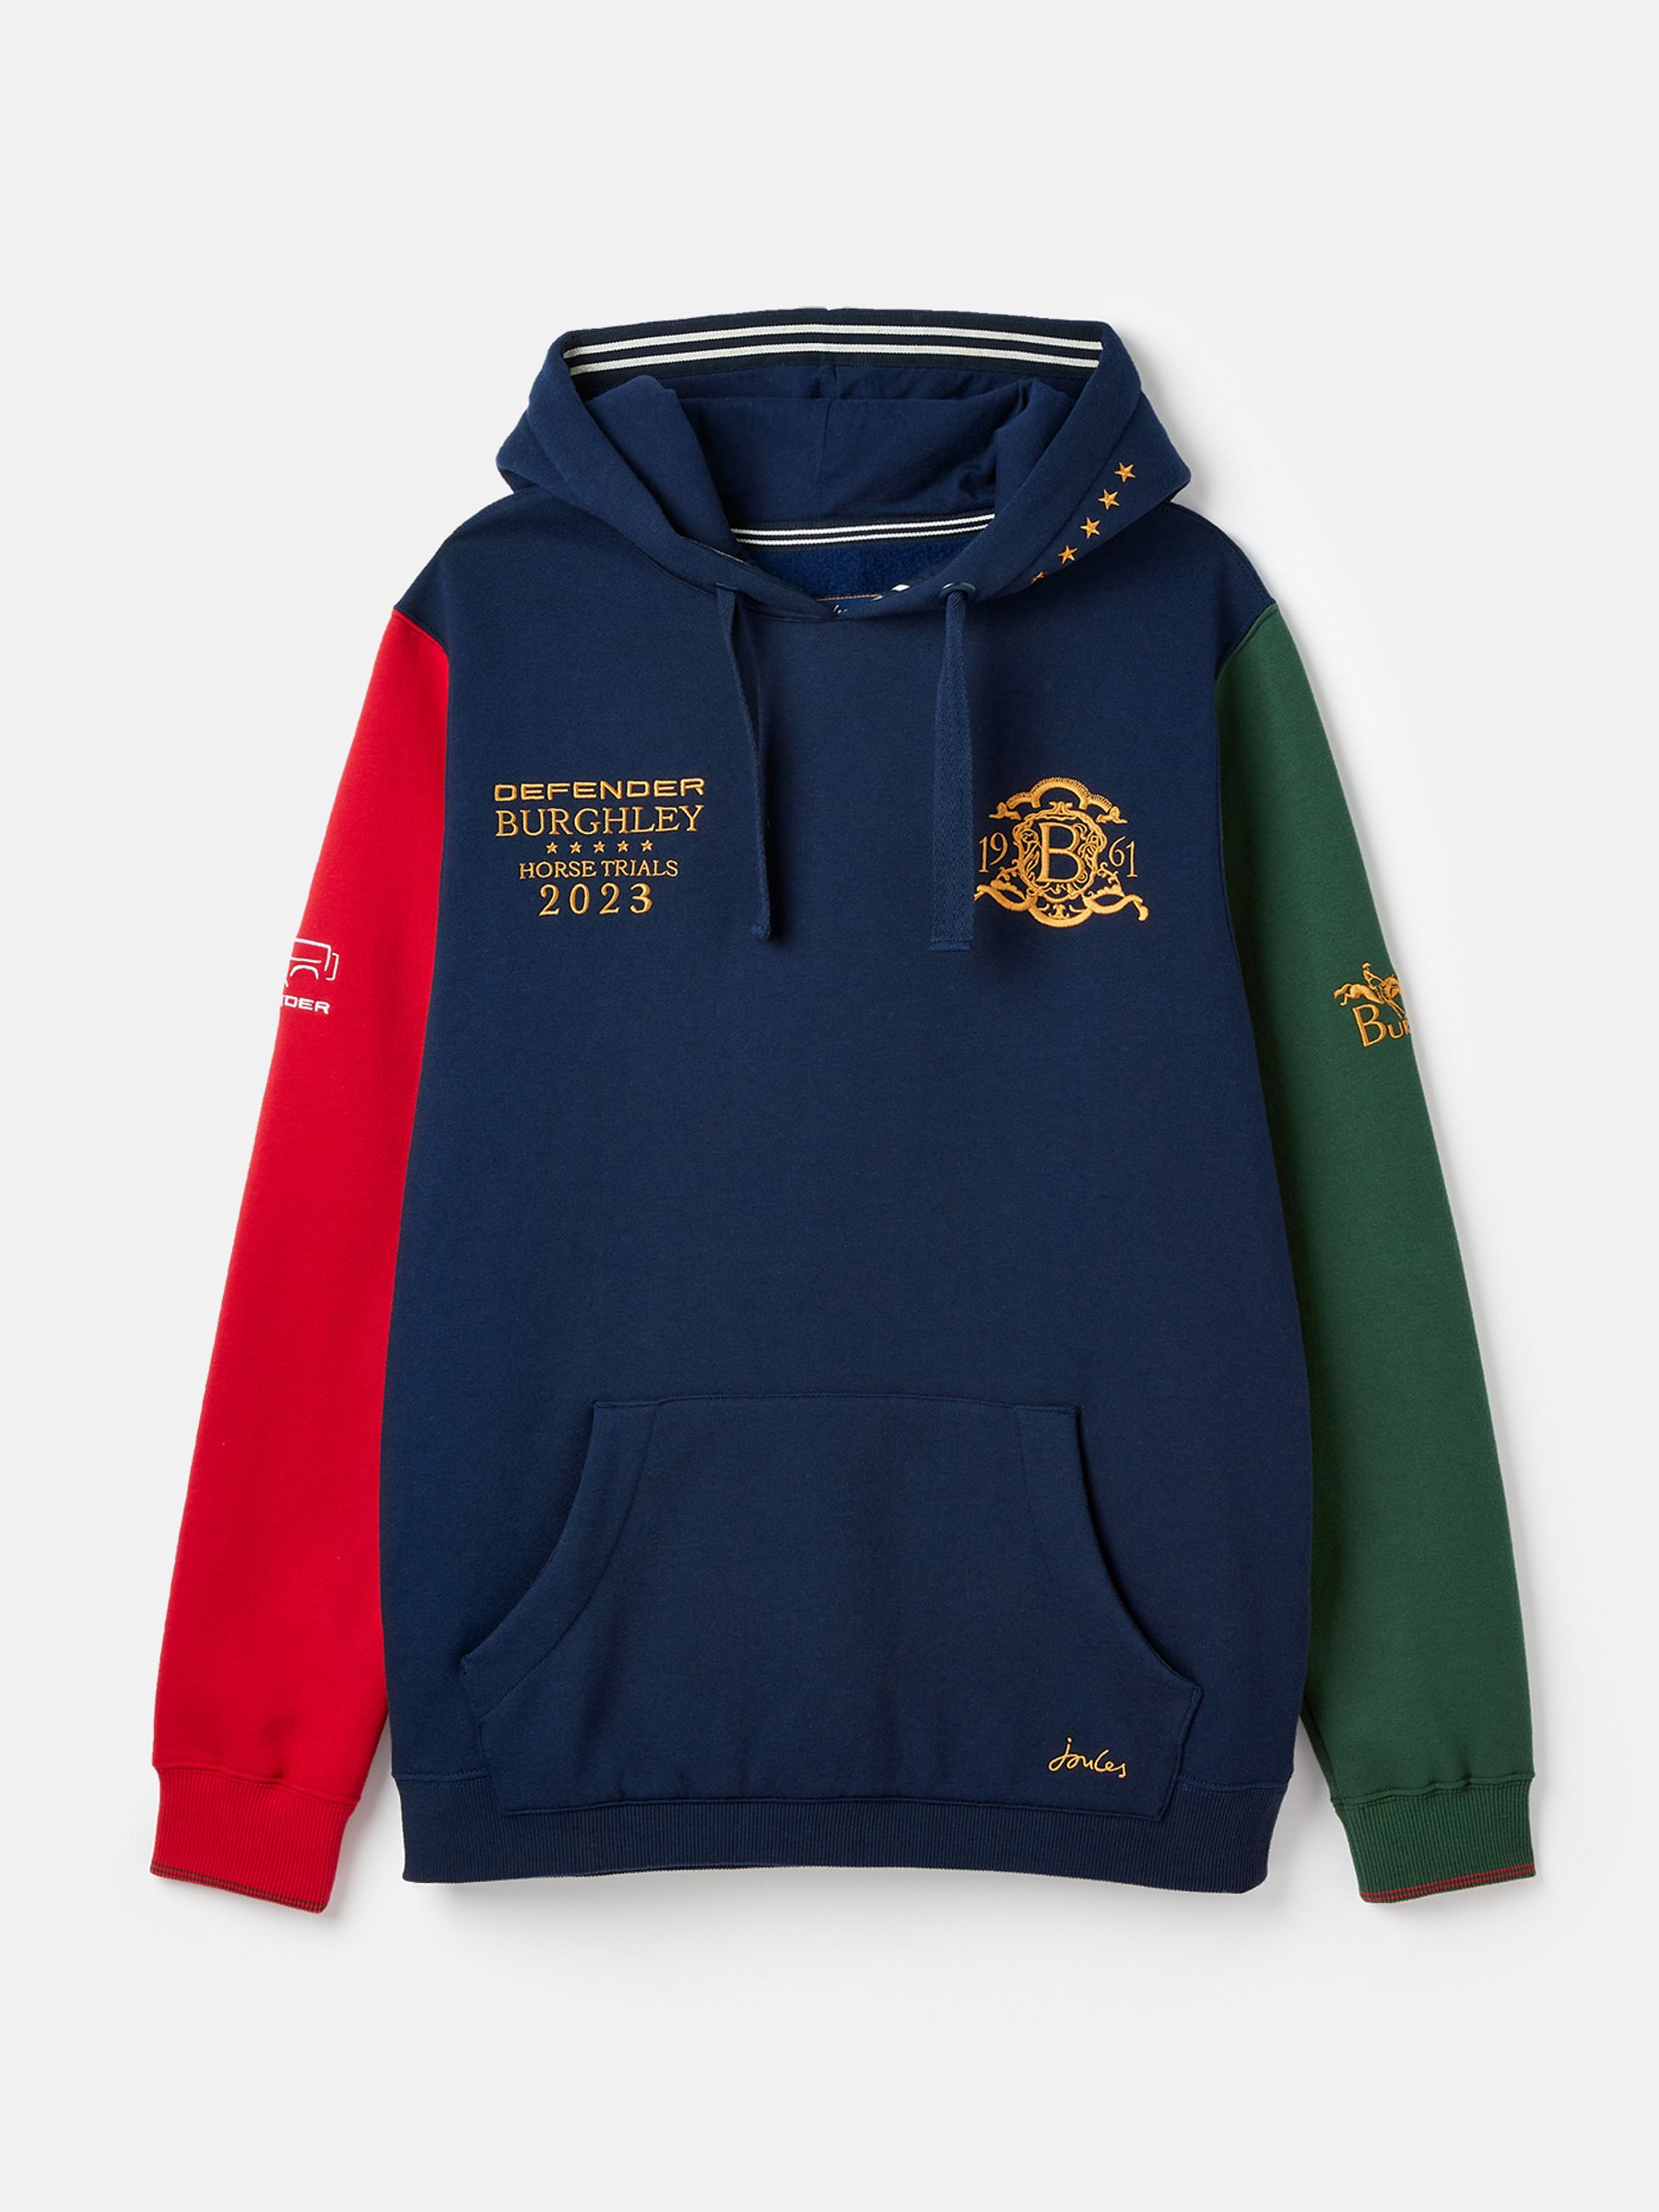 Buy Joules Official Burghley Hooded Sweatshirt from the Joules online shop